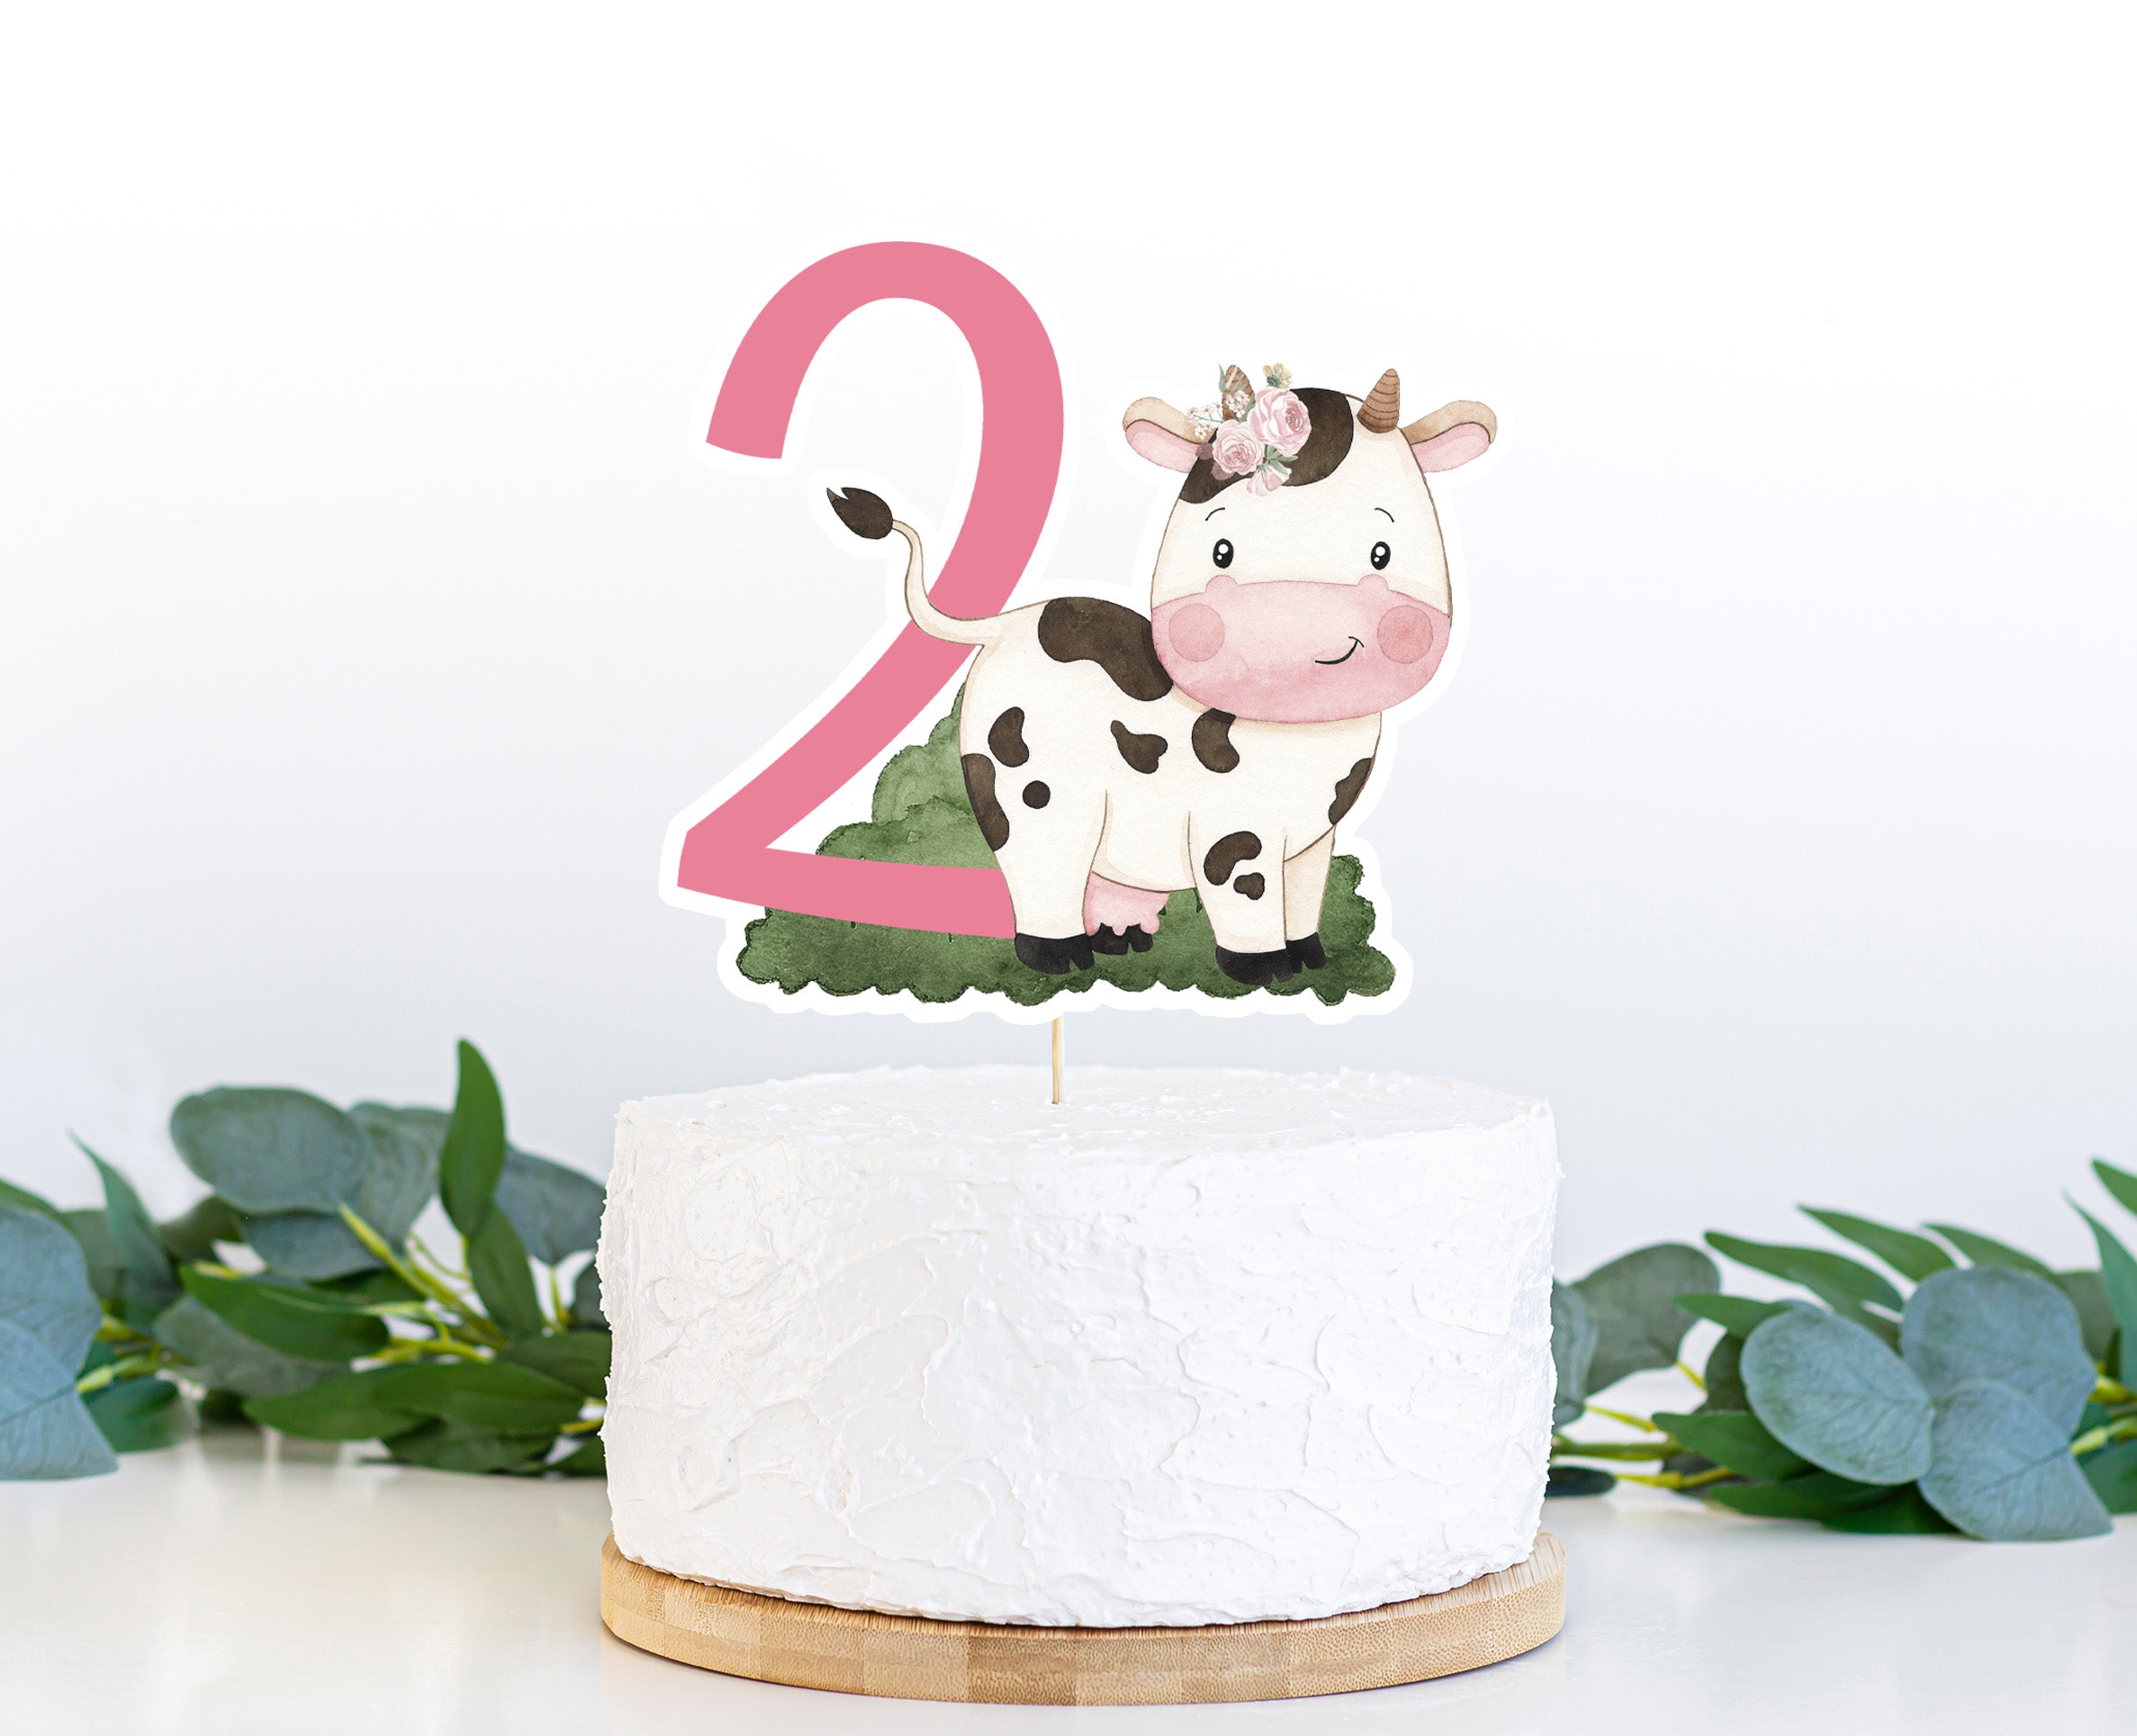 2nd Birthday Cake Stock Photos and Images - 123RF